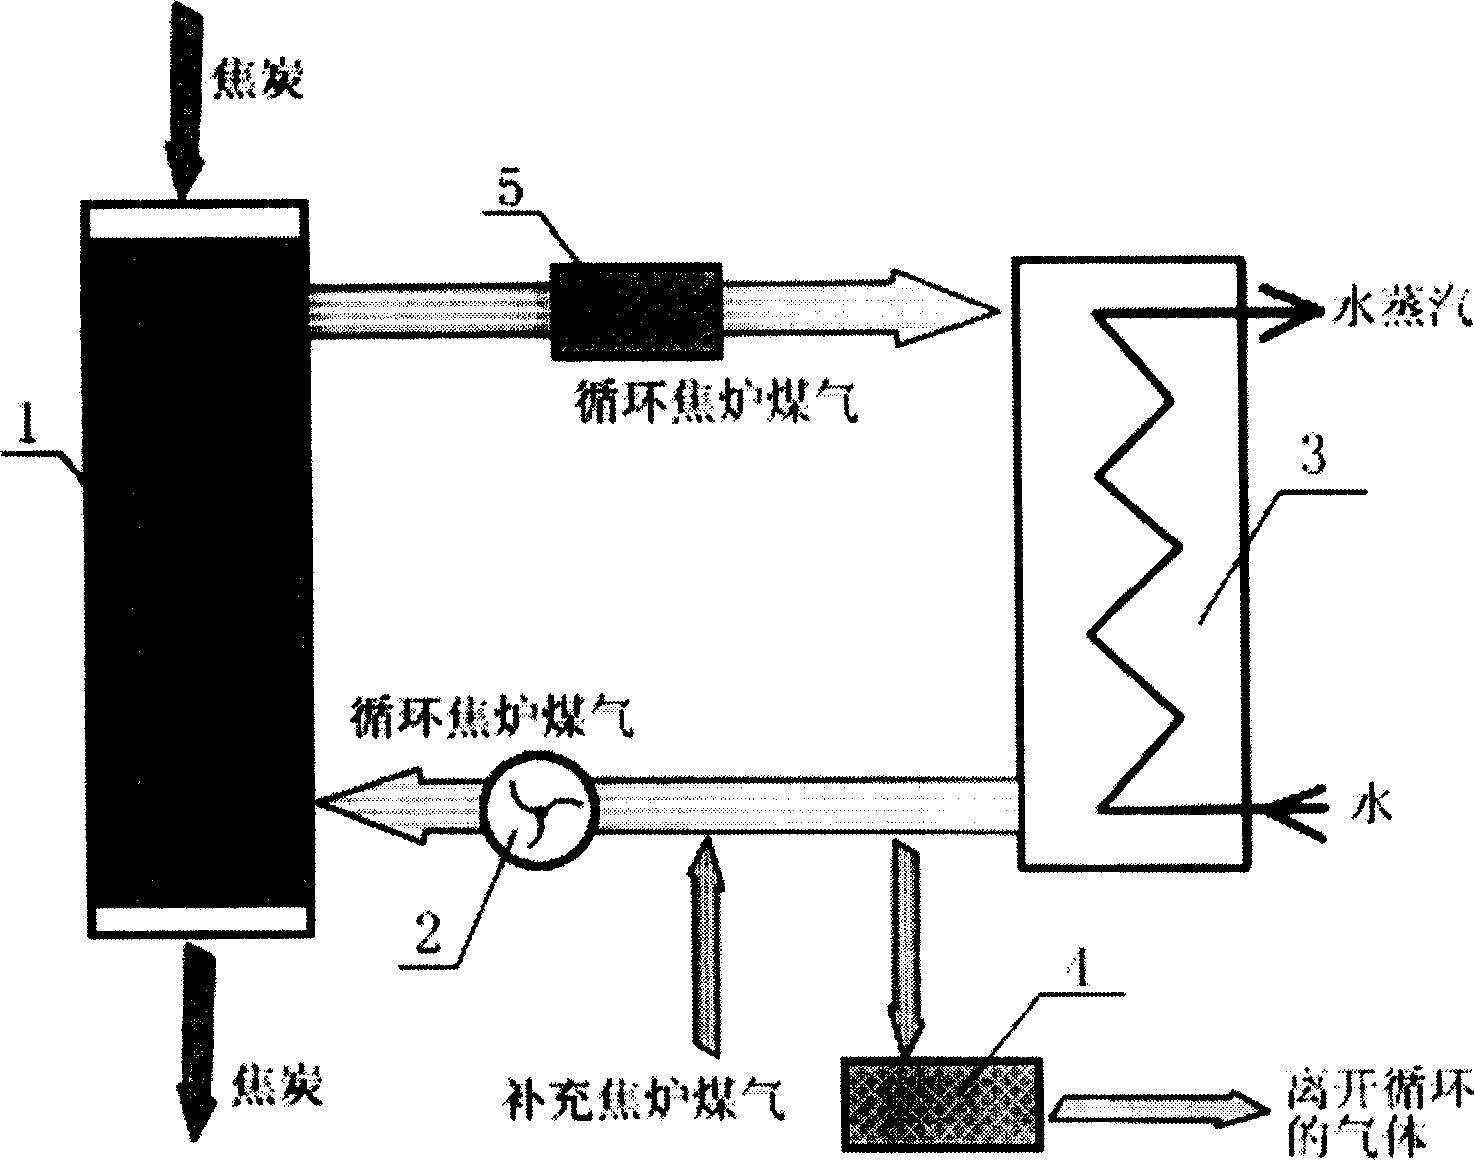 Process for dry coke quenching and coke desulfurating by coke oven gas